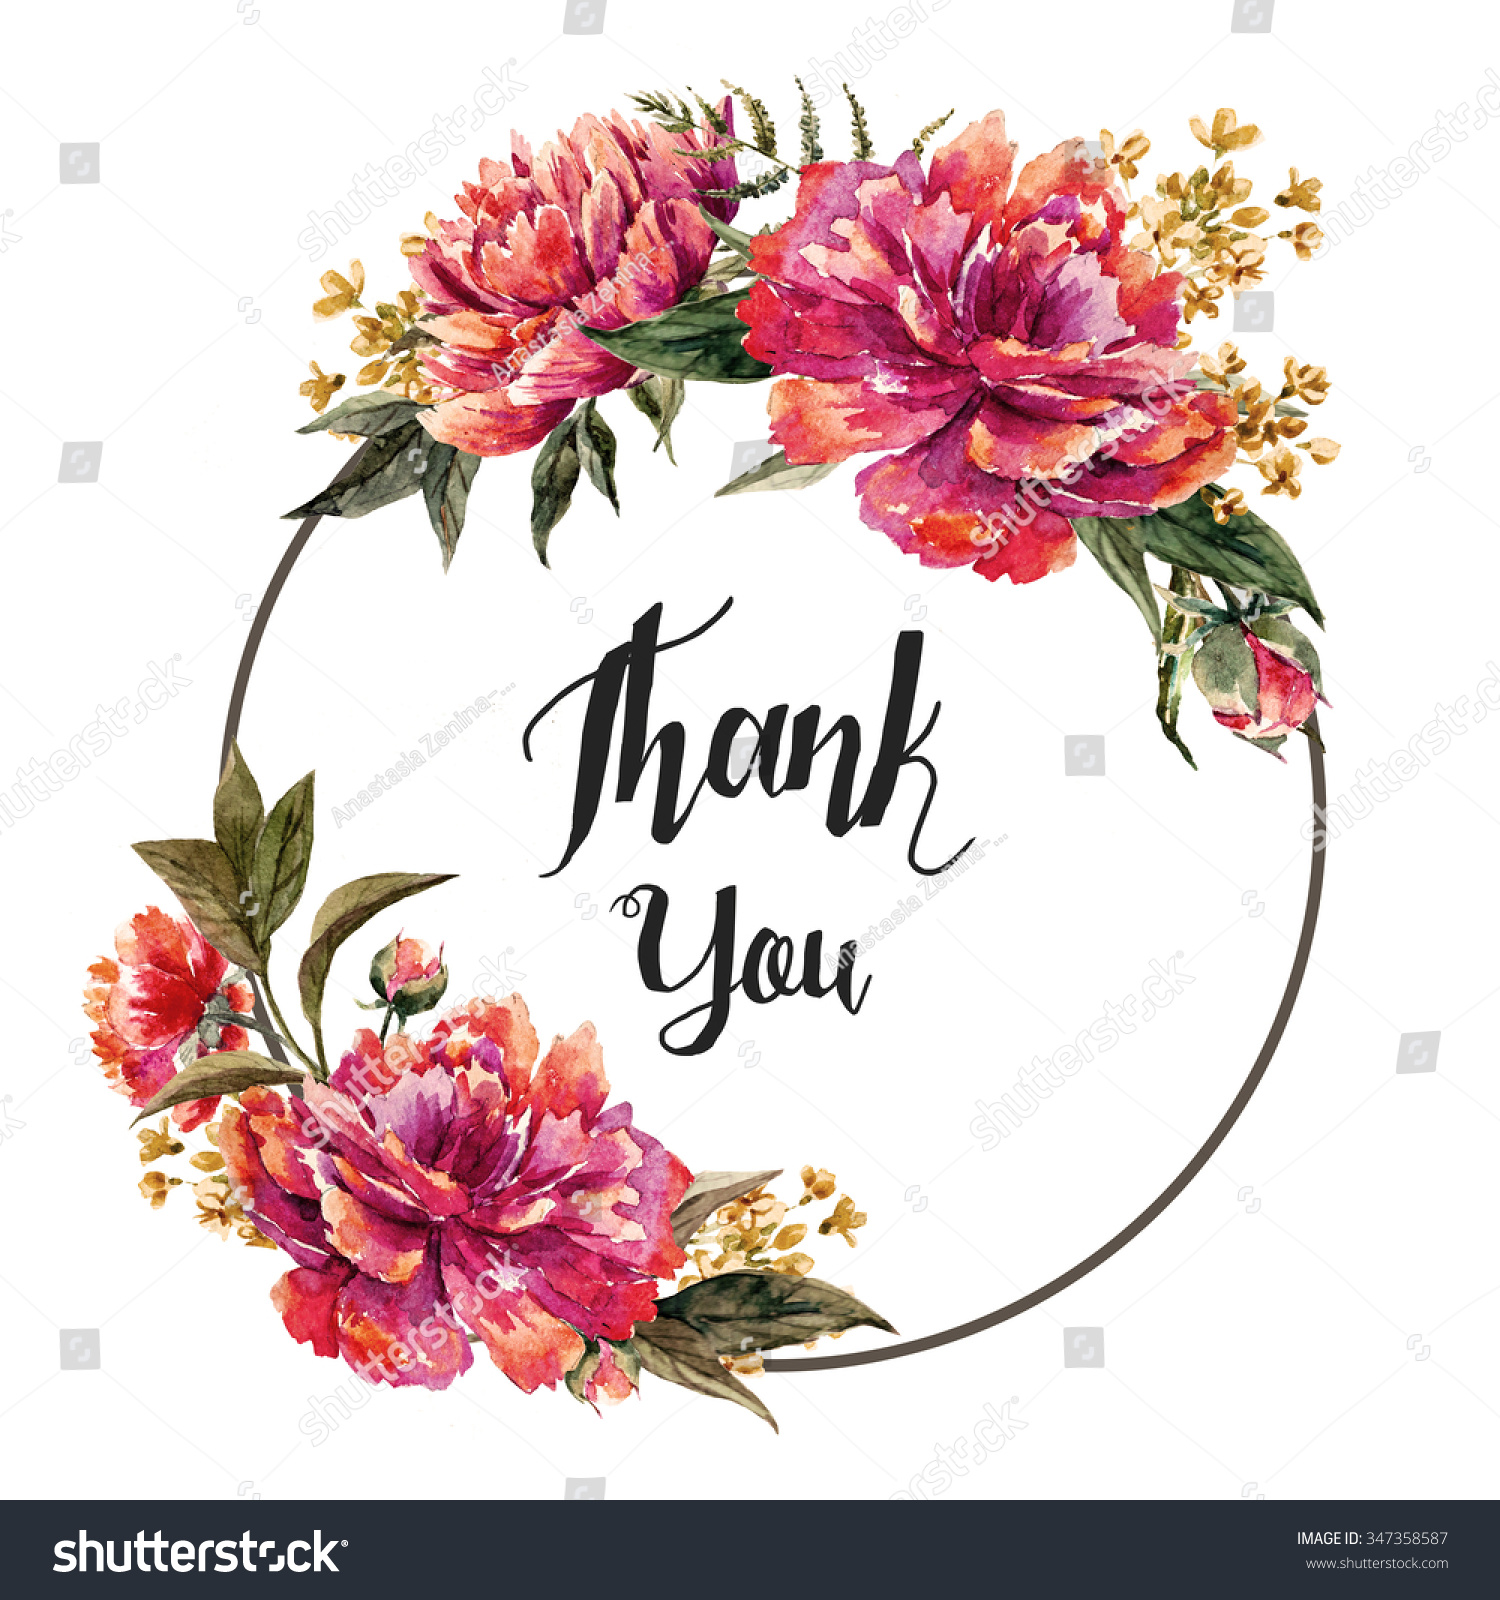 Watercolor Card Peony Flowers Thank You Stock Illustration 347358587 ...